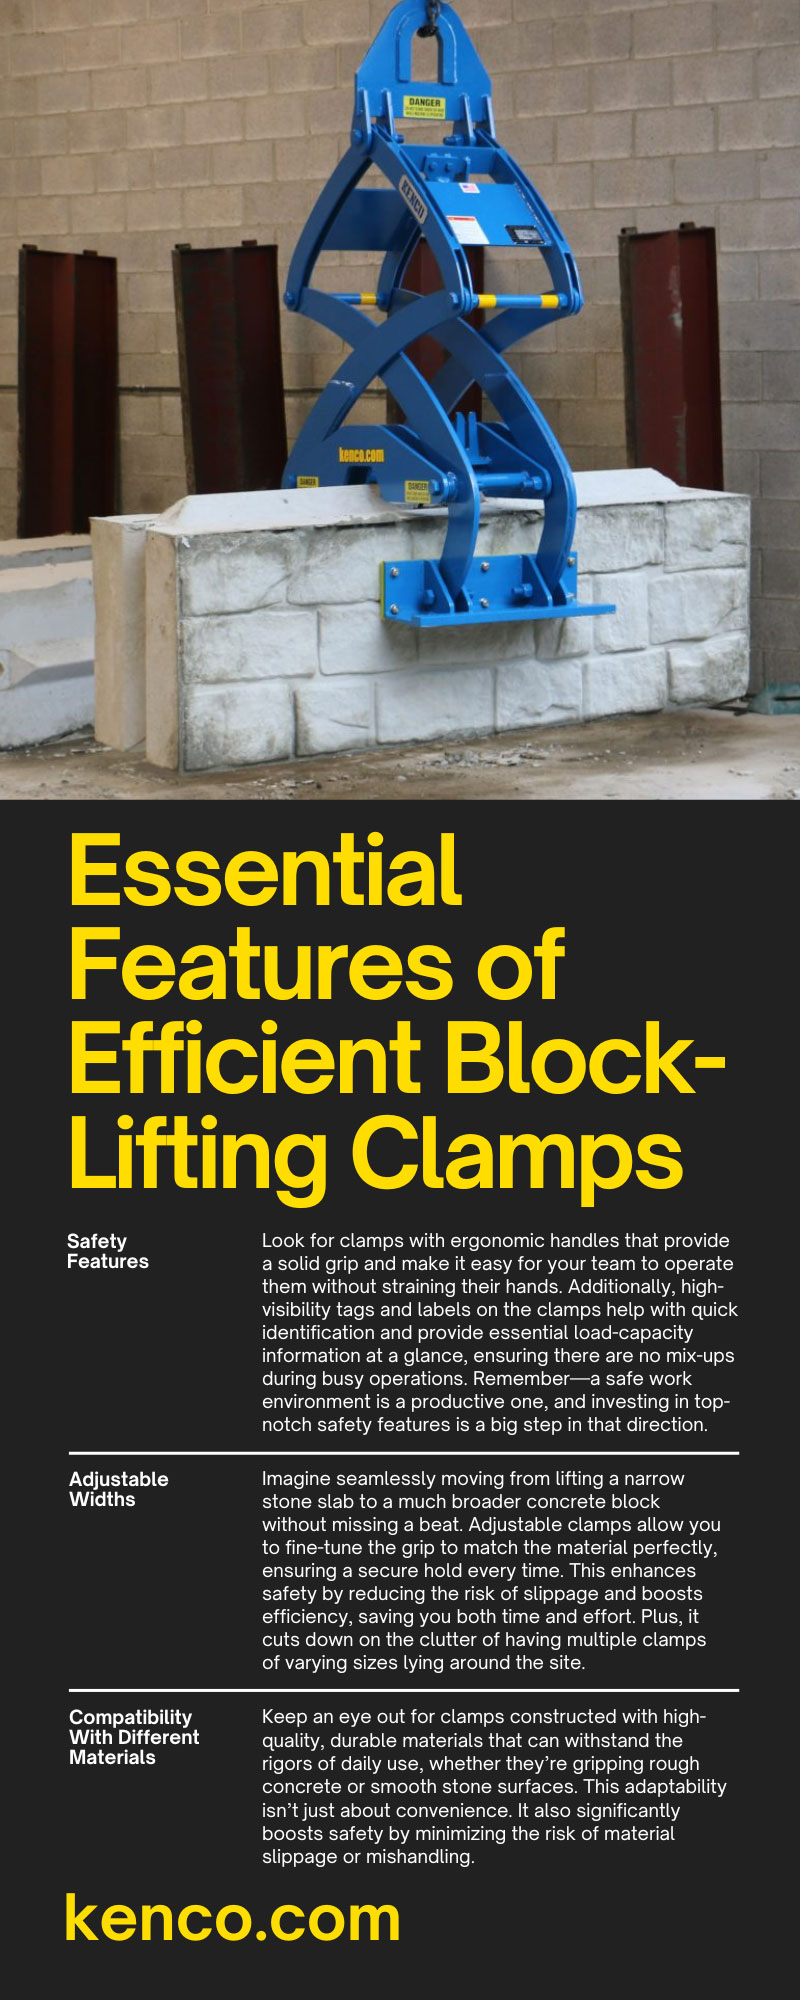 Essential Features of Efficient Block-Lifting Clamps